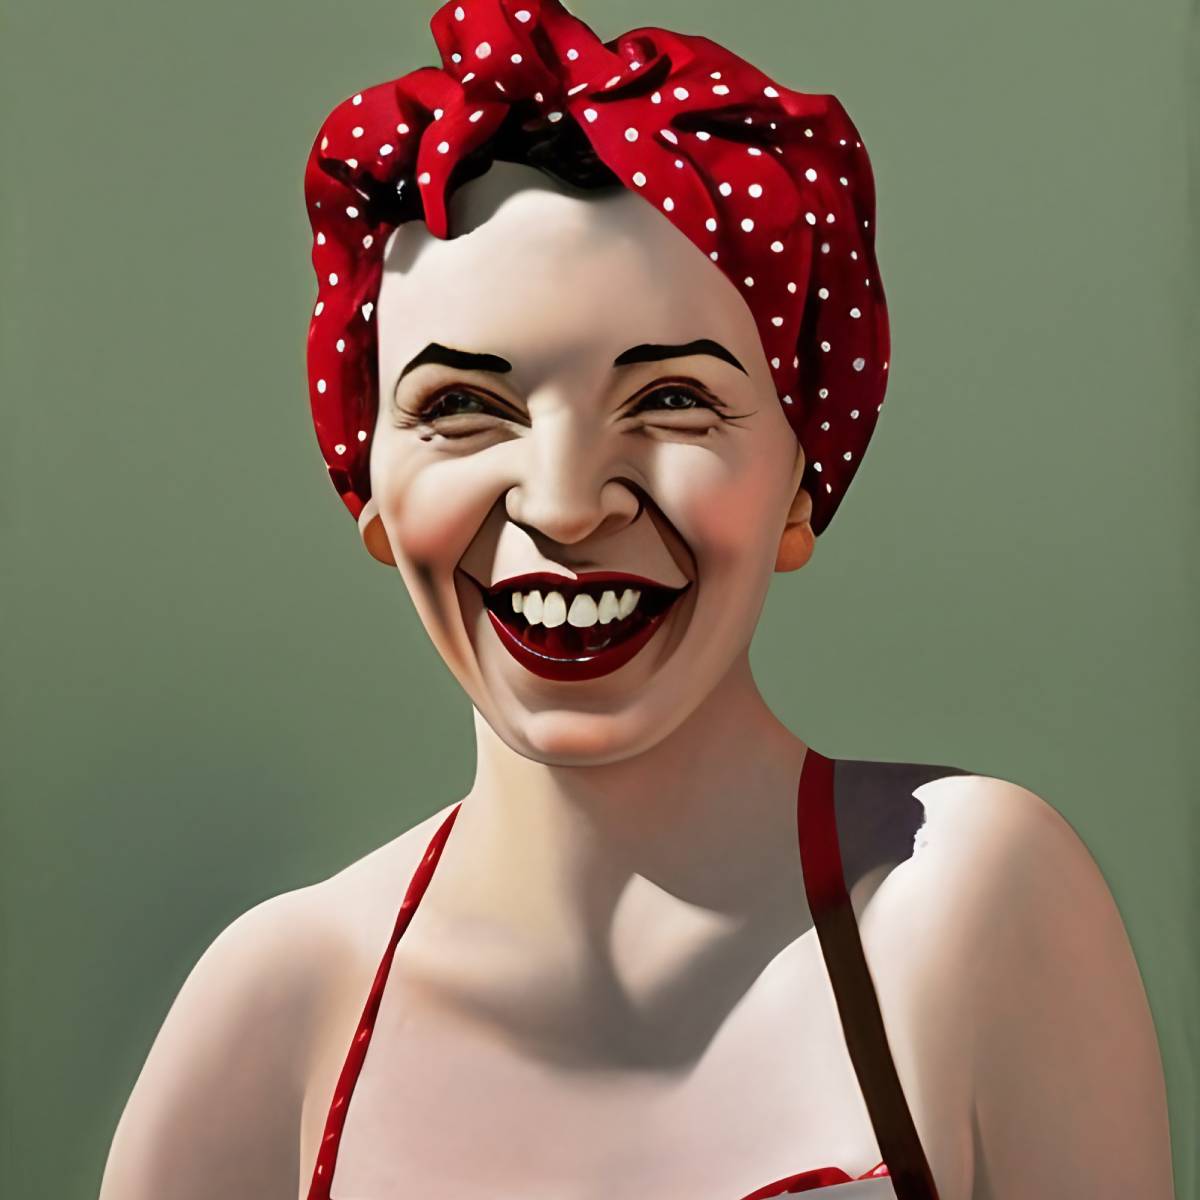 A portrait of Rosie the Riveter laughing. (©)